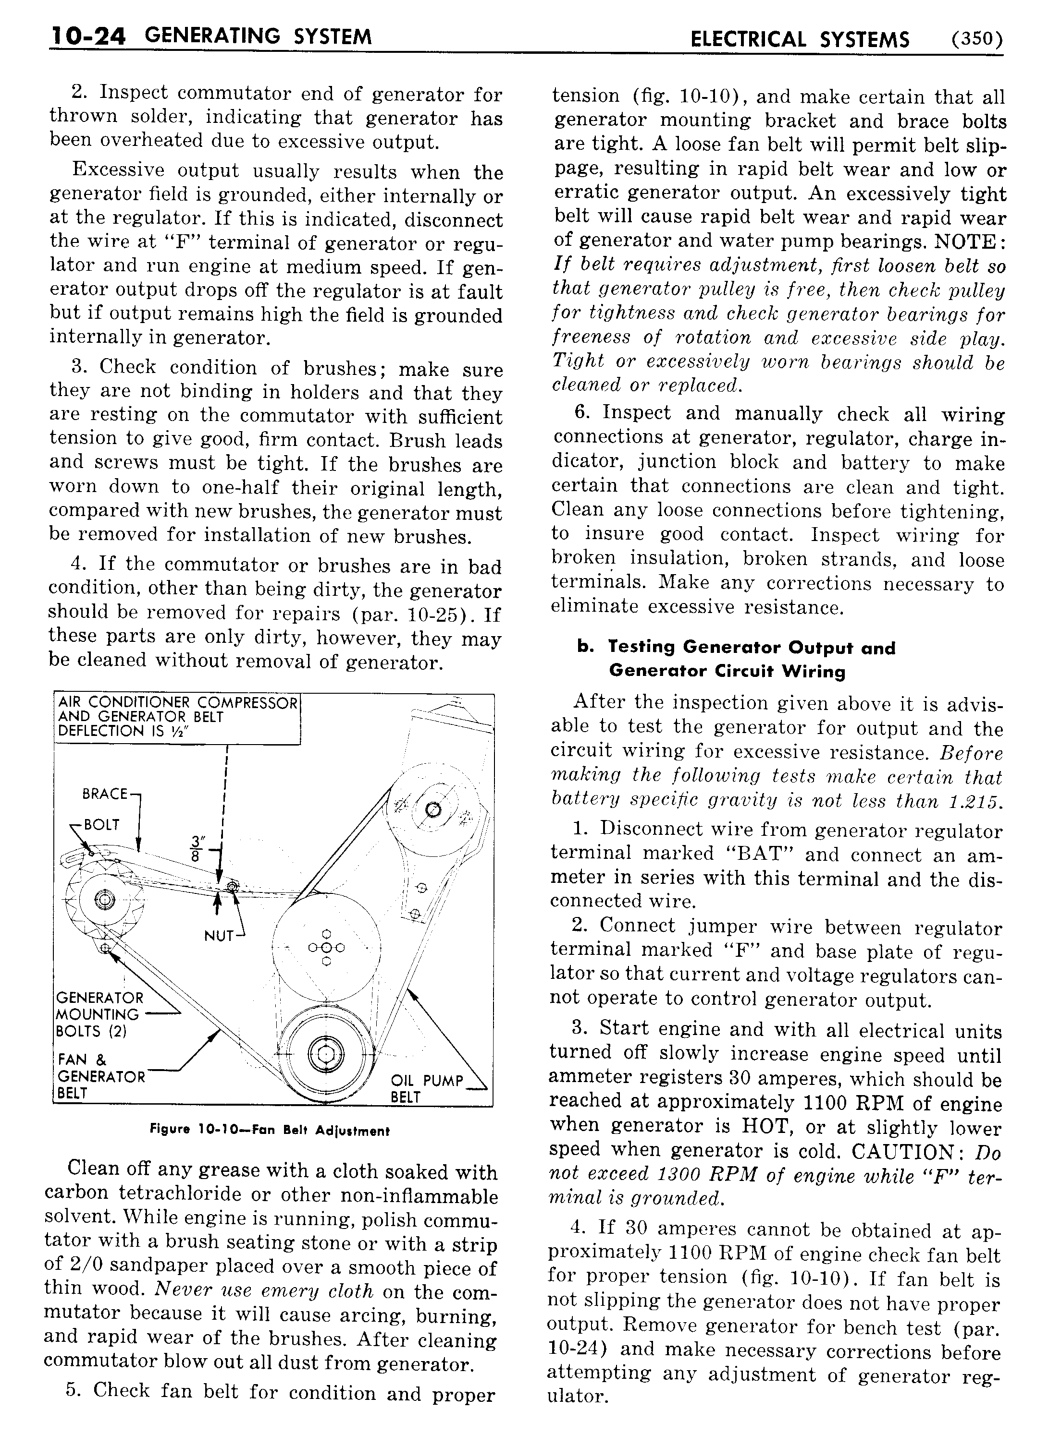 n_11 1956 Buick Shop Manual - Electrical Systems-024-024.jpg